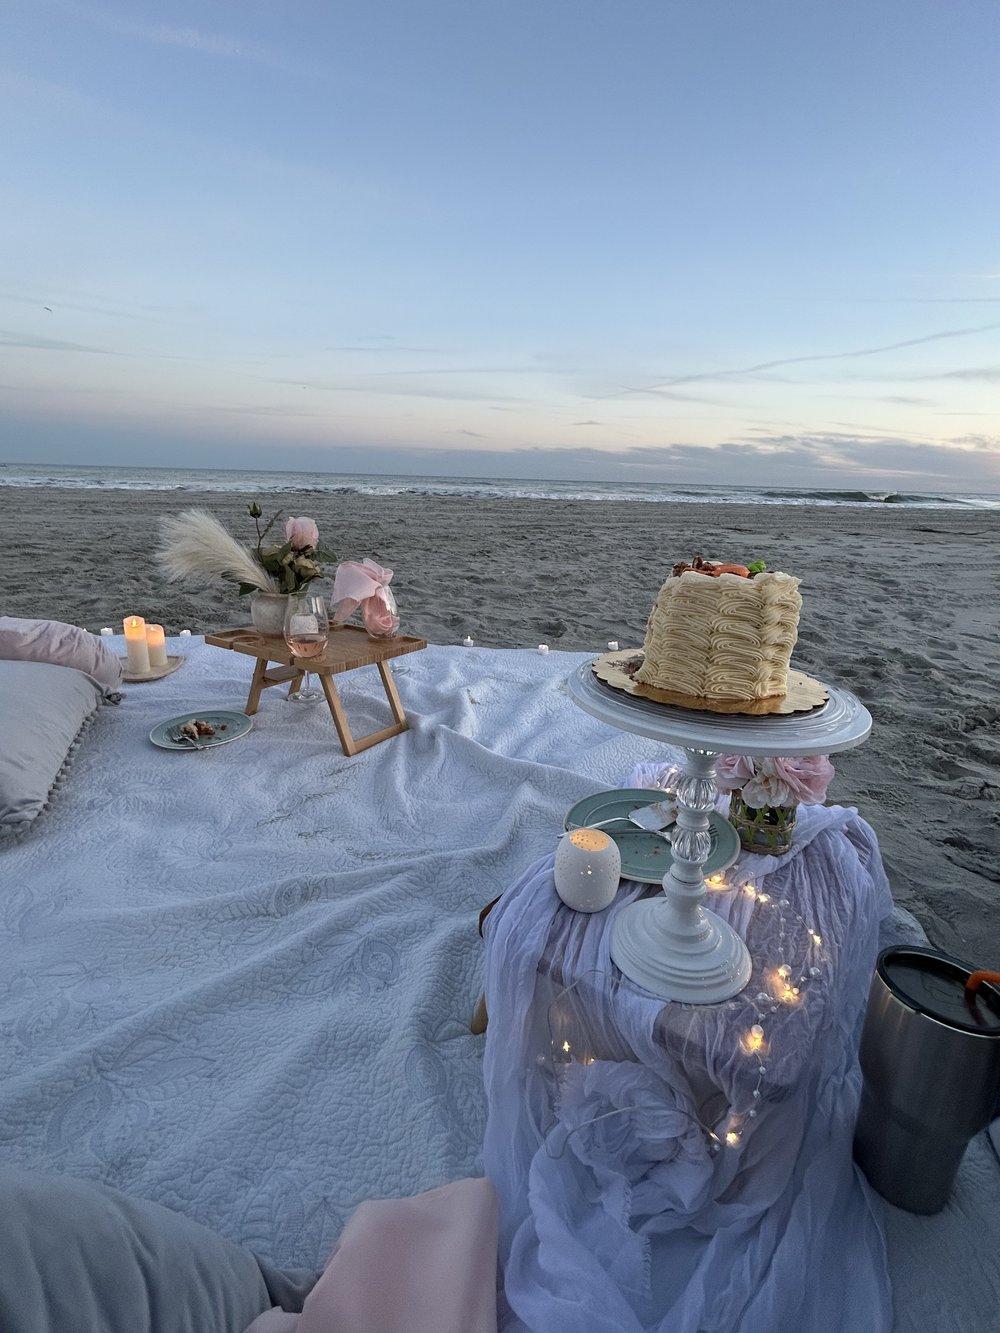 7 Date Night Ideas Can Ignite the Spark in Your Relationship - Stargazing Picnic